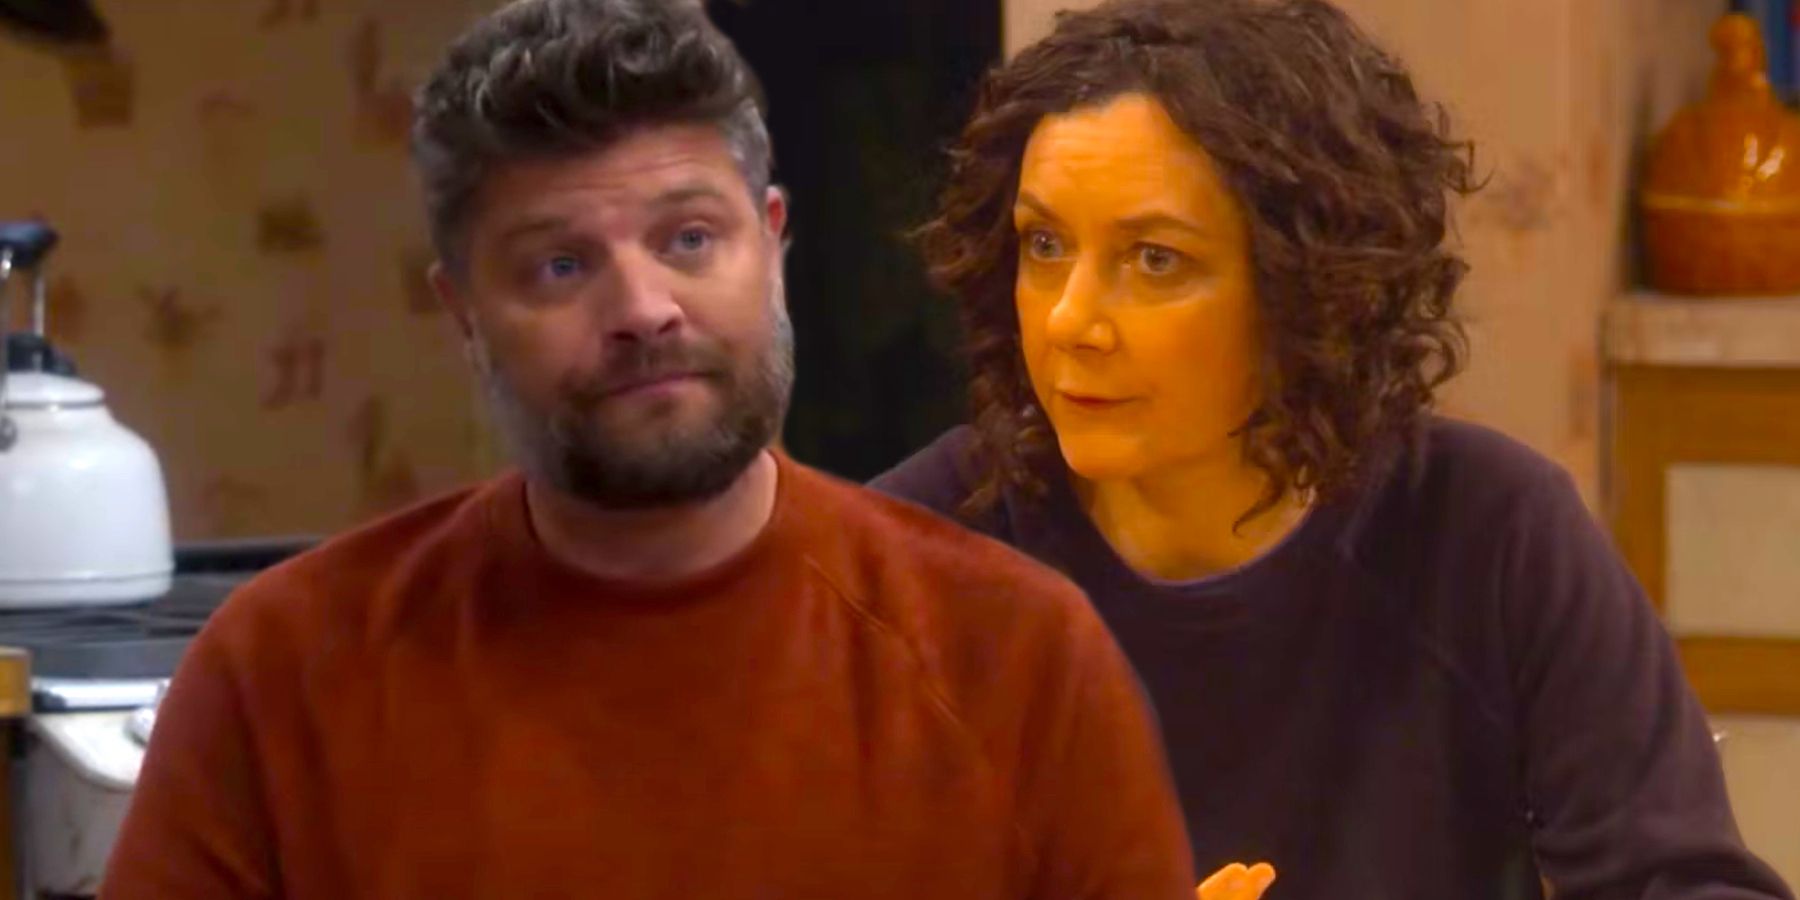 Jay R Ferguson as Ben looking up and Sara Gilbert as Darlene looking stressed in The Conners Season 5.